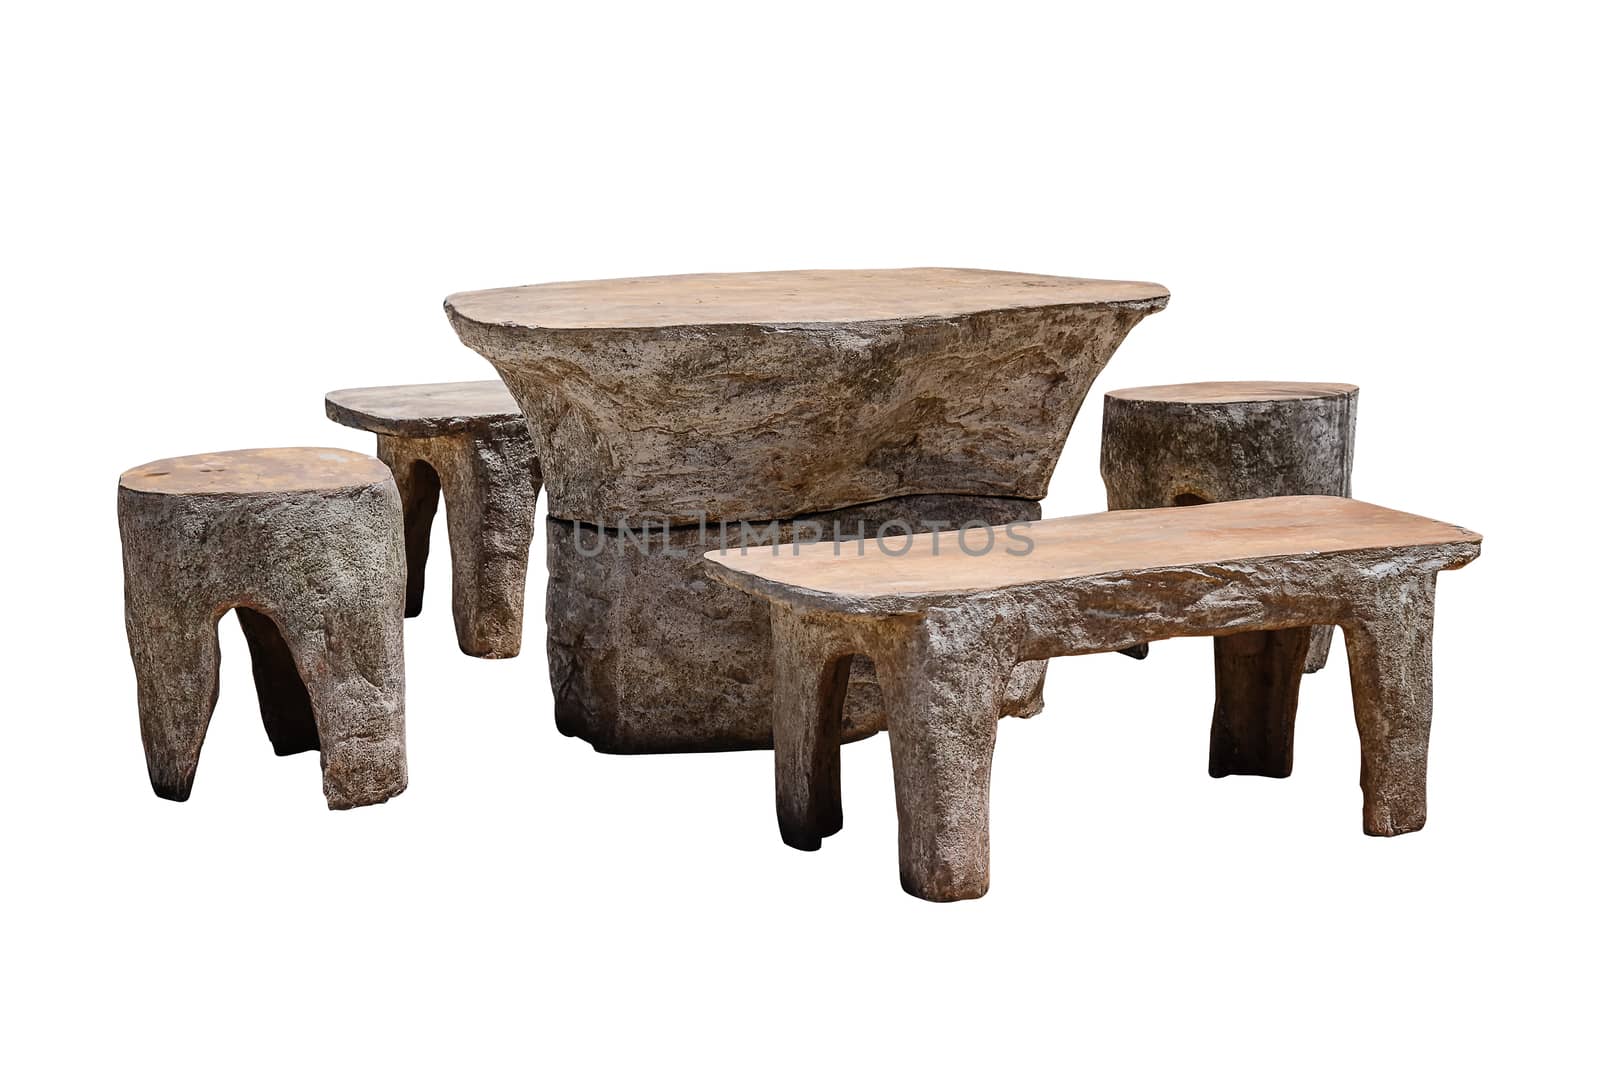 Set of stone table with bench isolated on white background, work with clipping path.